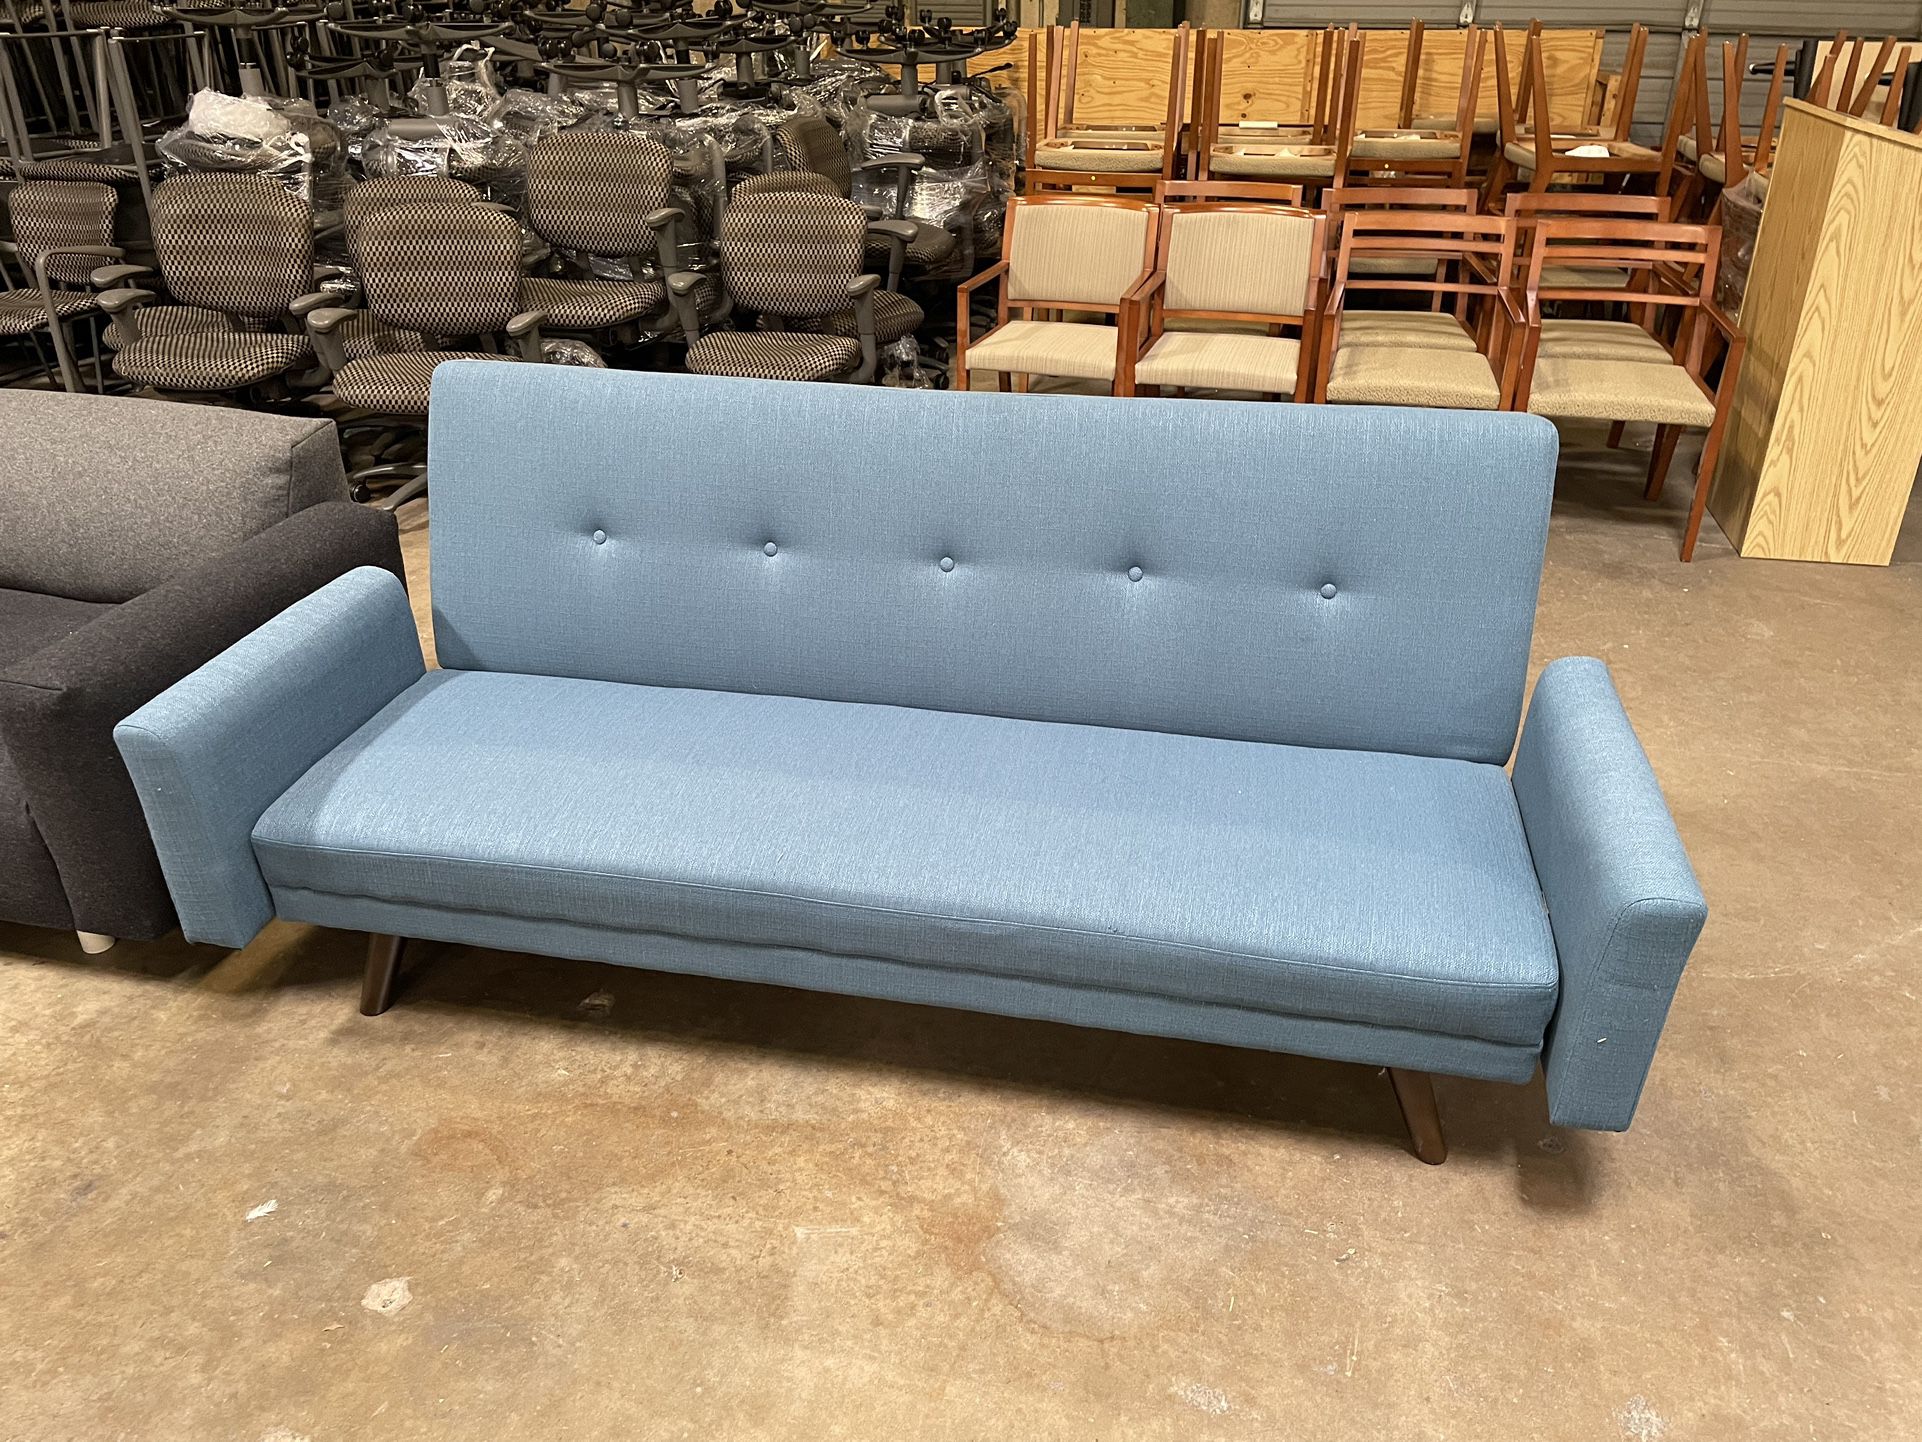 Blue 7’ Office Or Home Couch!